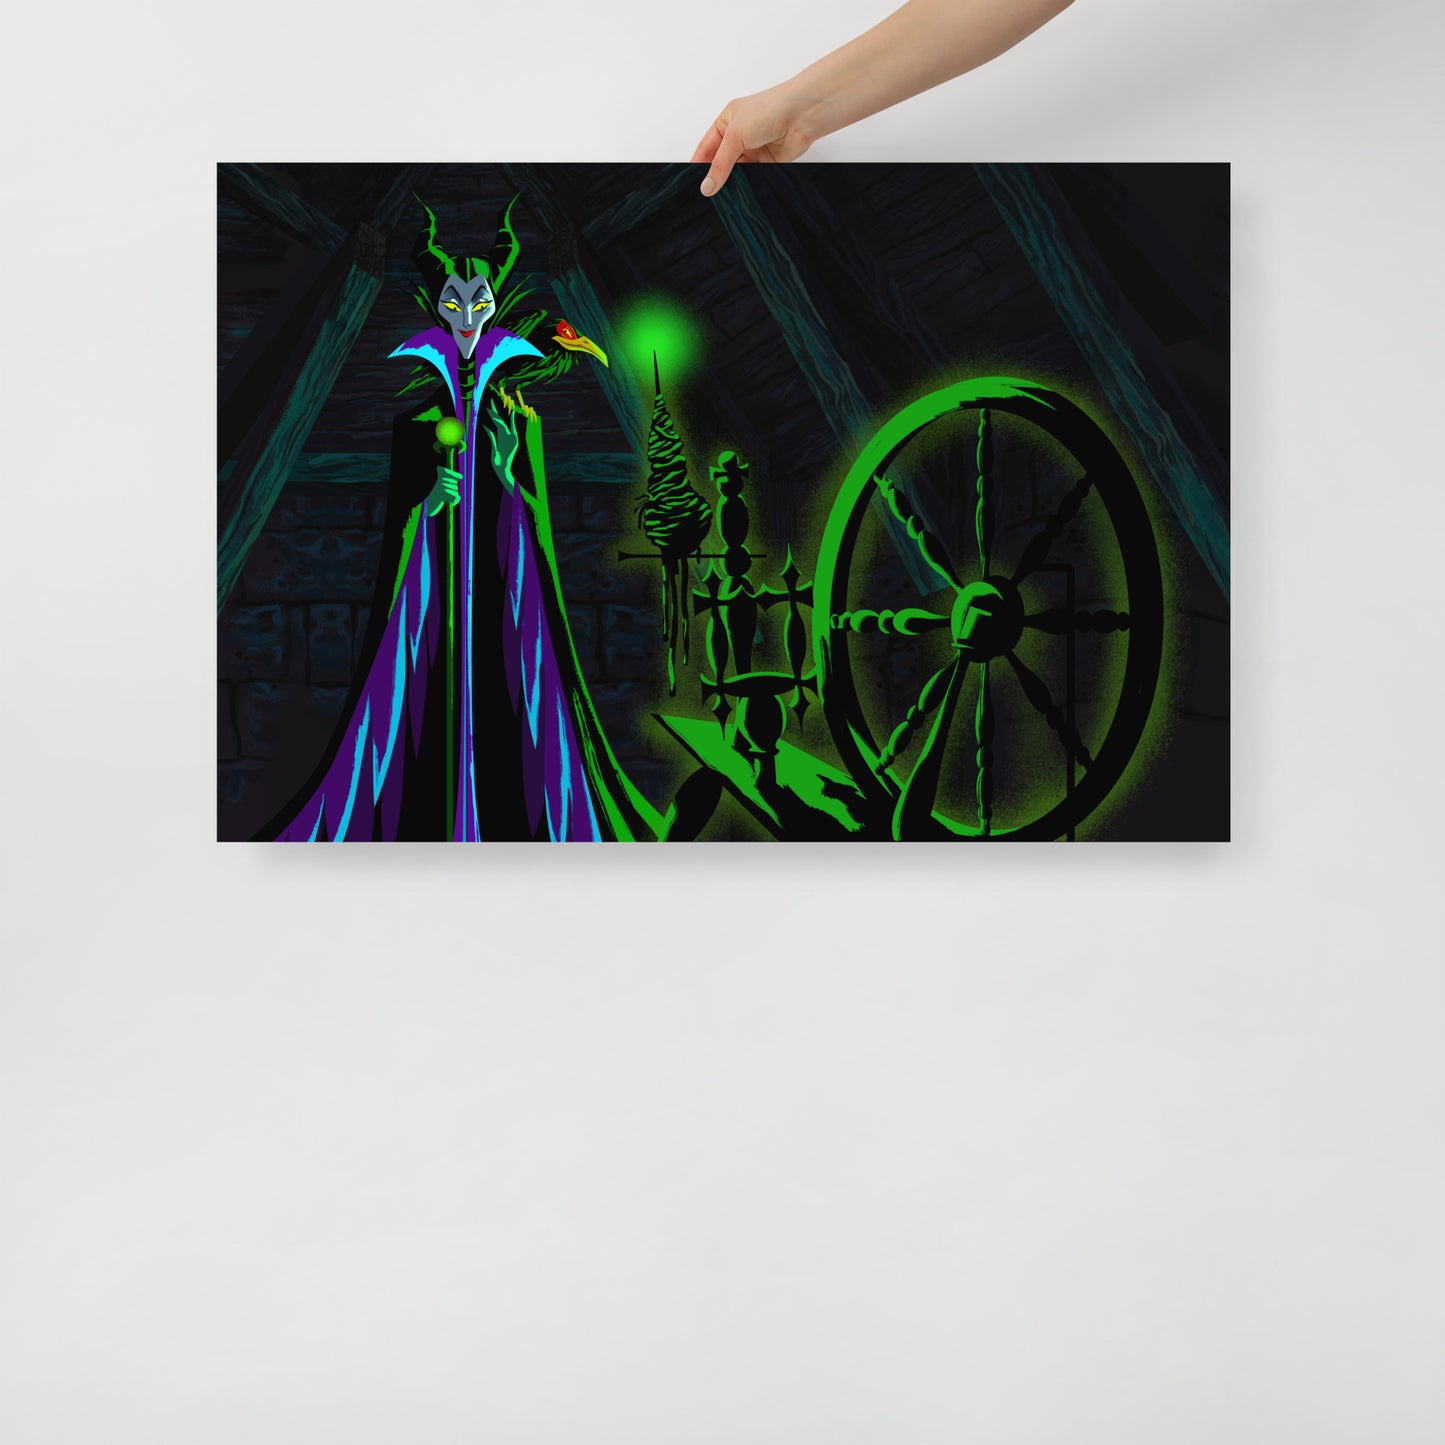 "Touch the Spindle!" | Signed and Numbered Edition